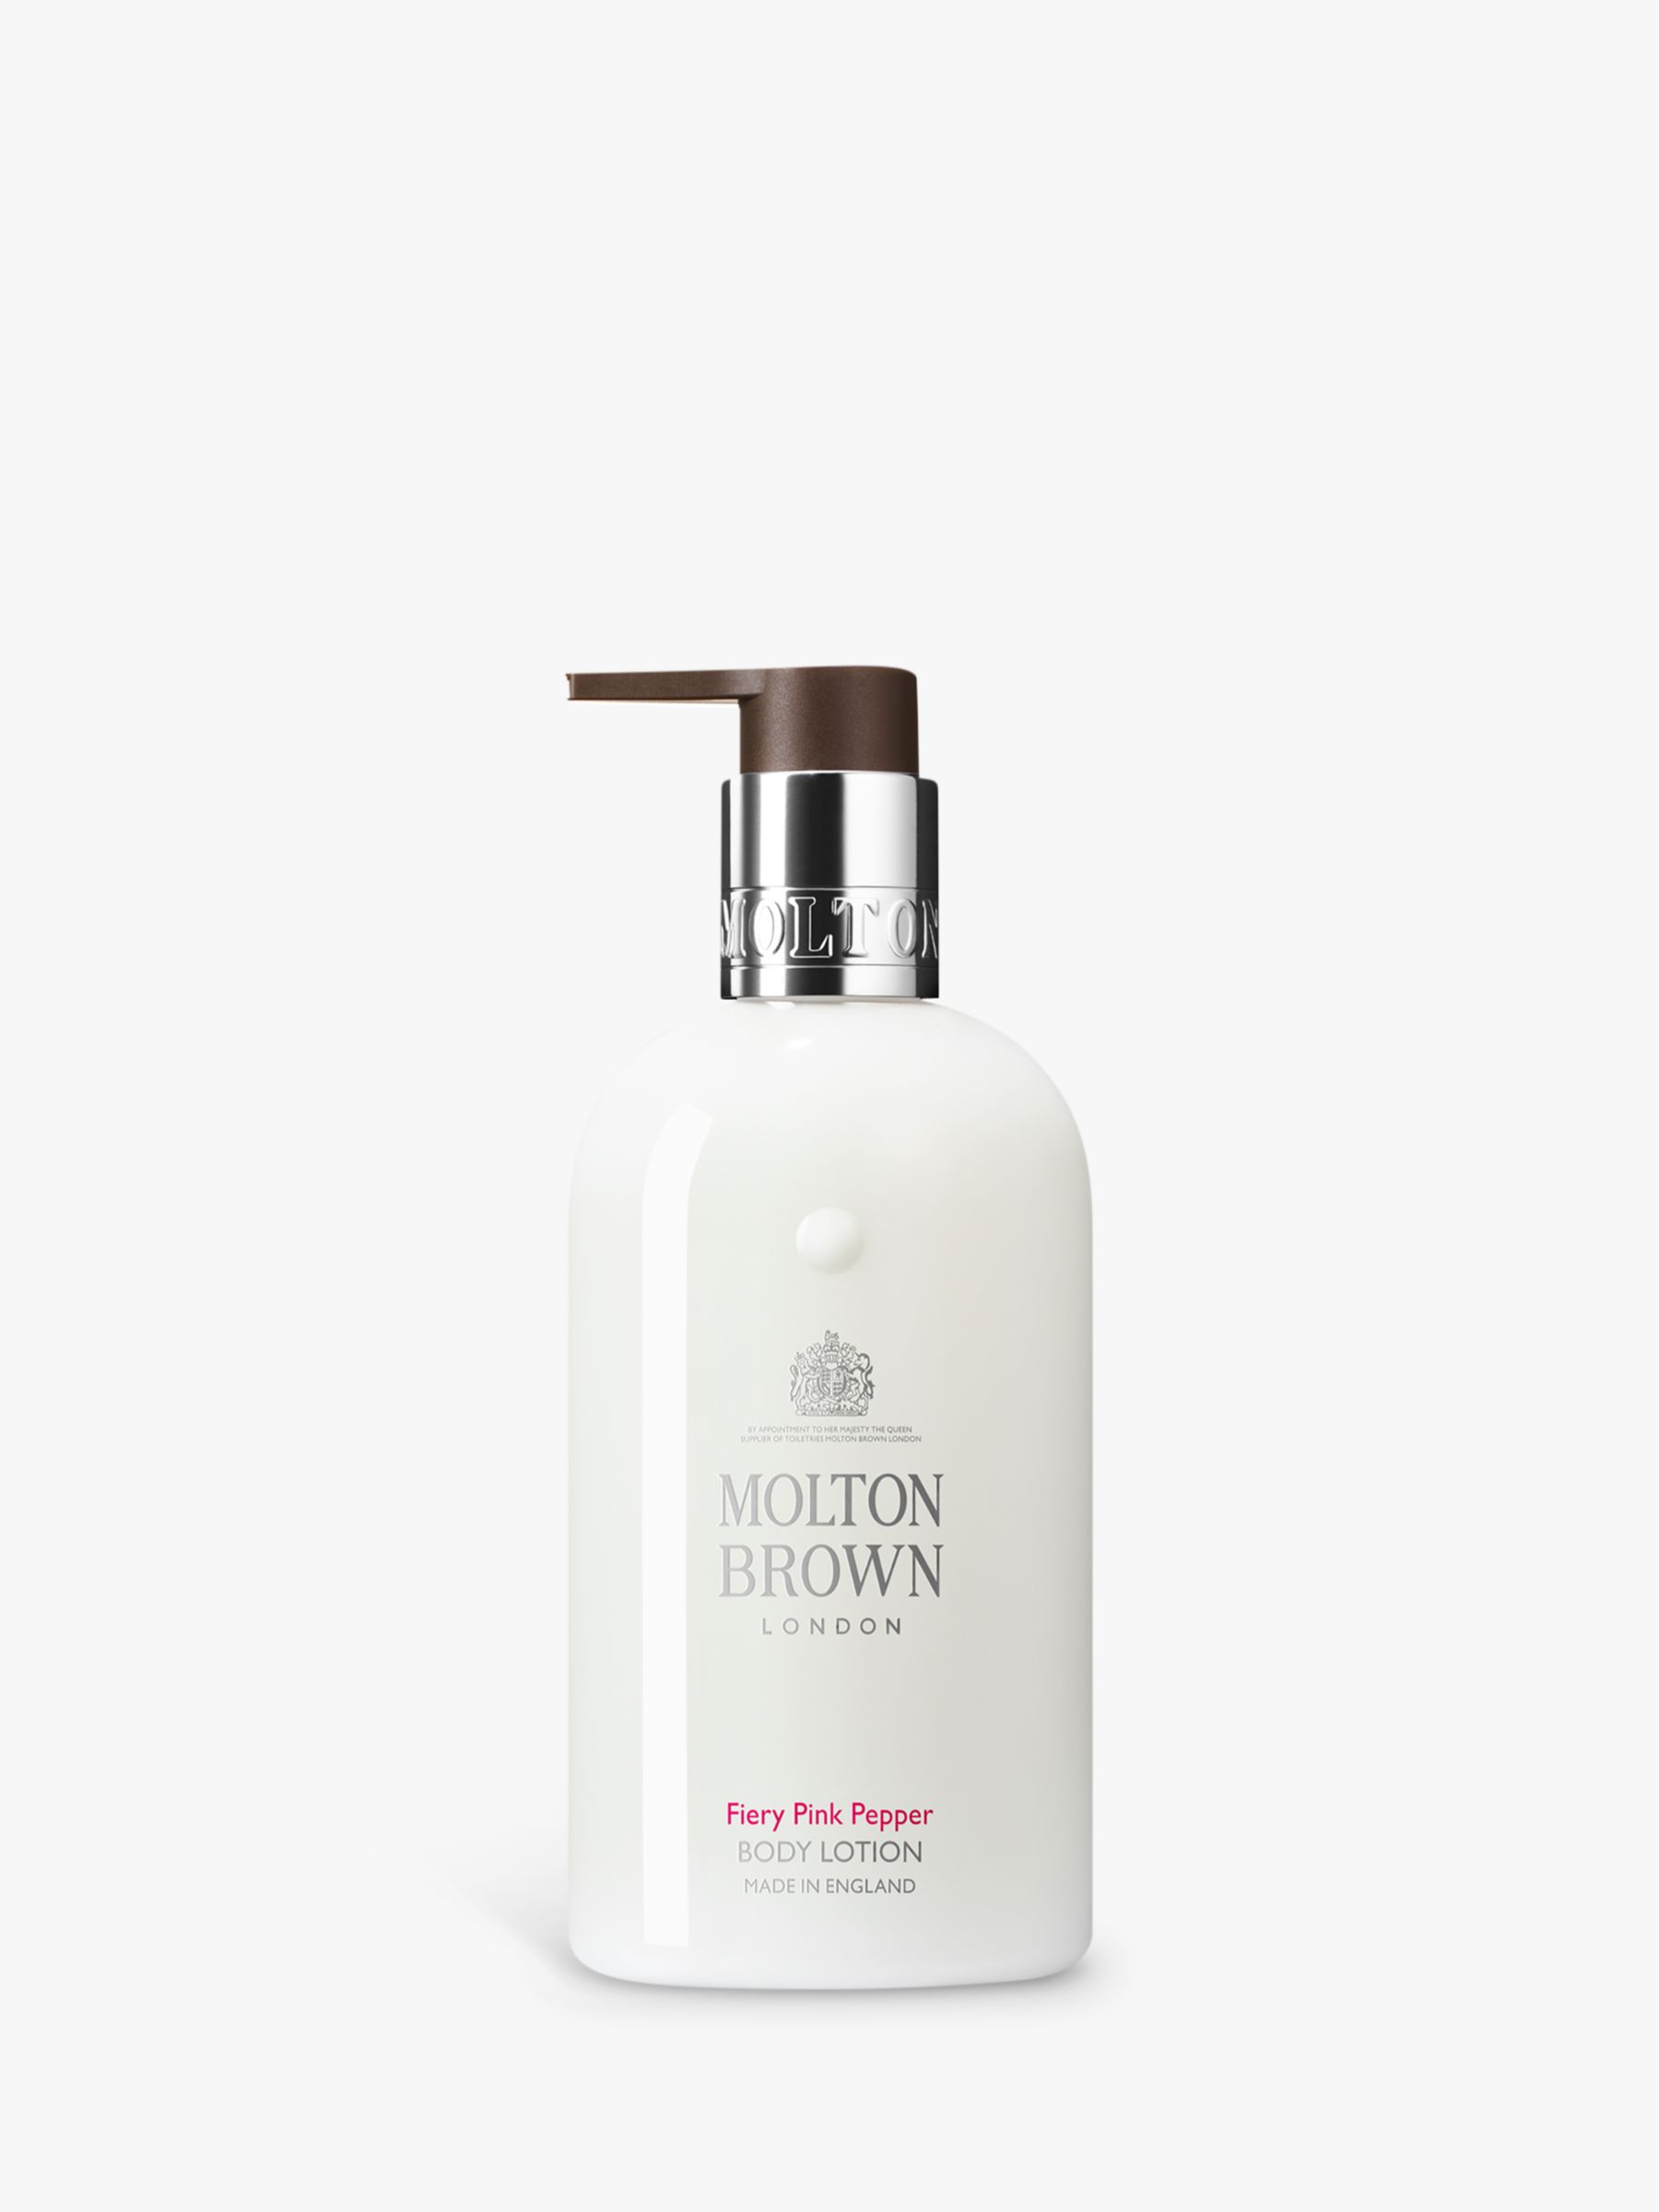 Molton Brown Fiery Pink Pepper Body Lotion, 300ml